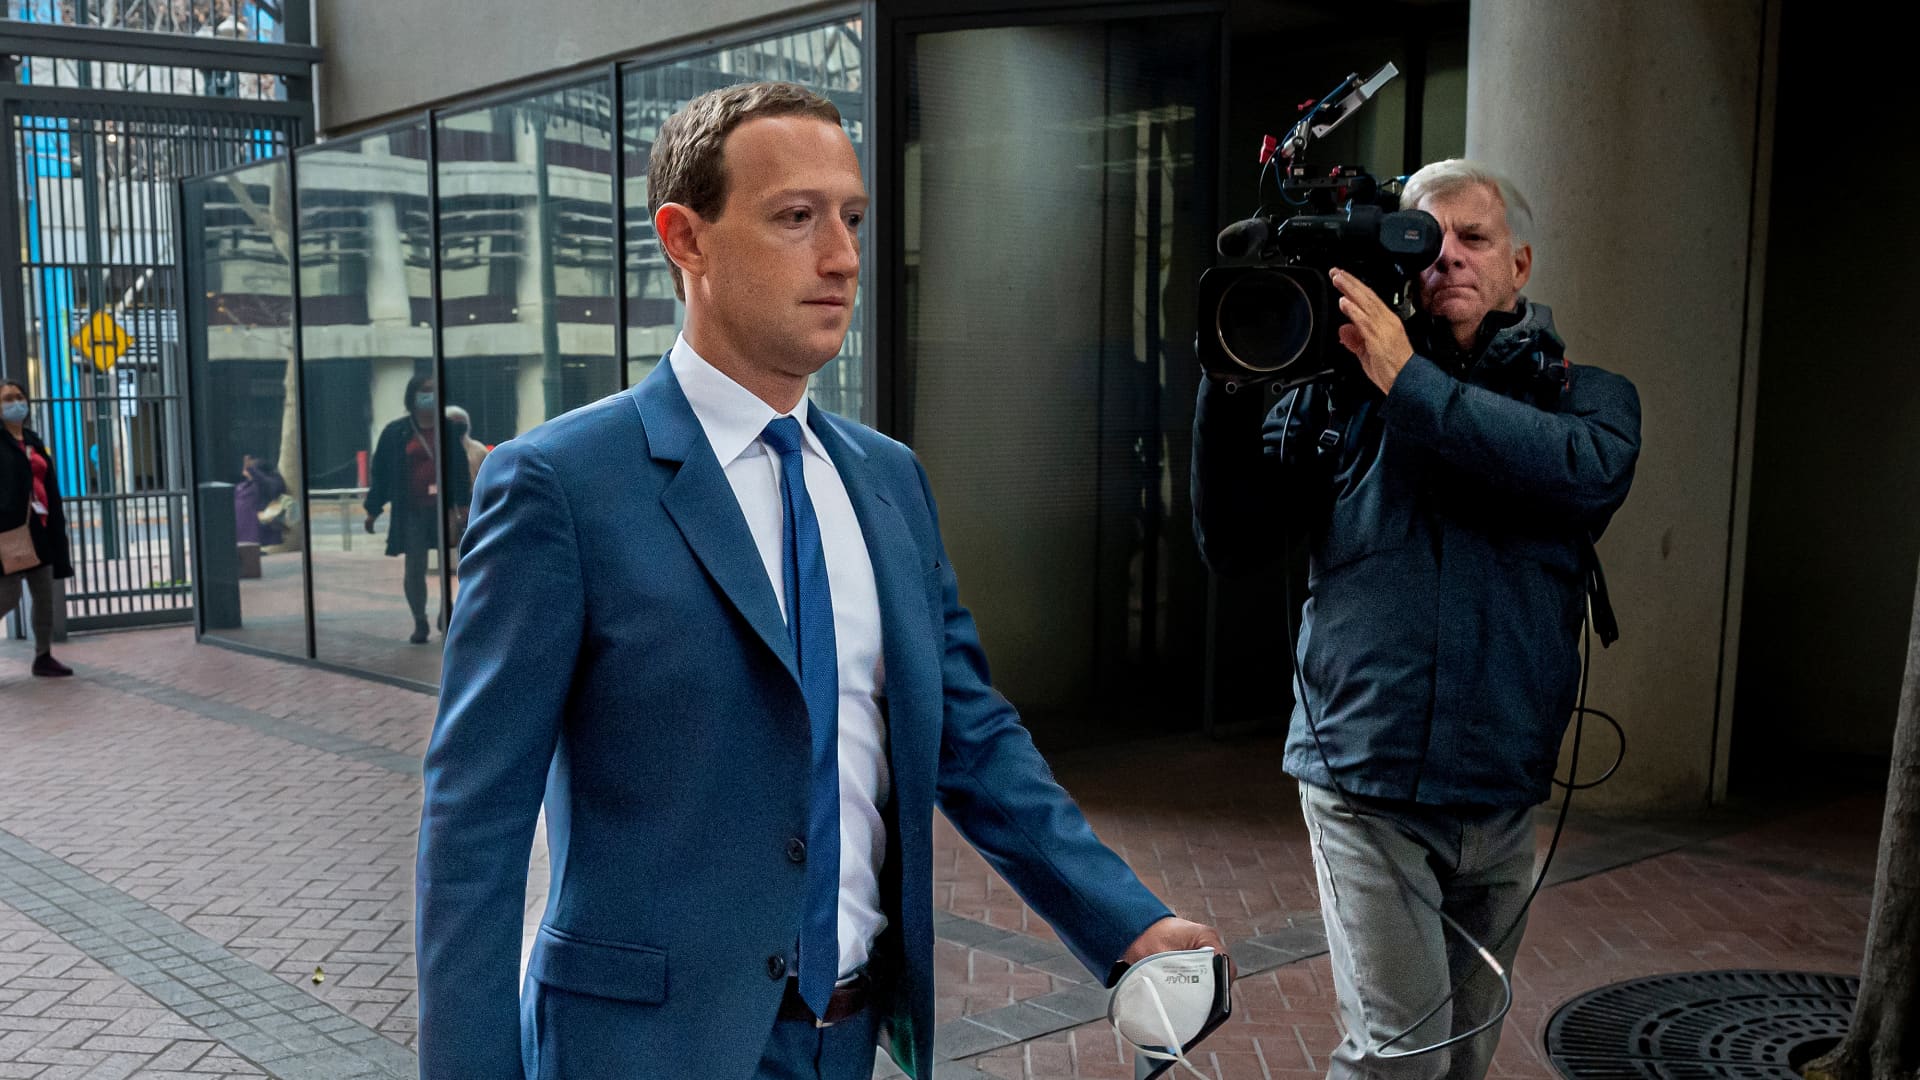 Mark Zuckerberg, chief executive officer of Meta Platforms Inc., left, arrives at federal court in San Jose, California, US, on Tuesday, Dec. 20, 2022. 